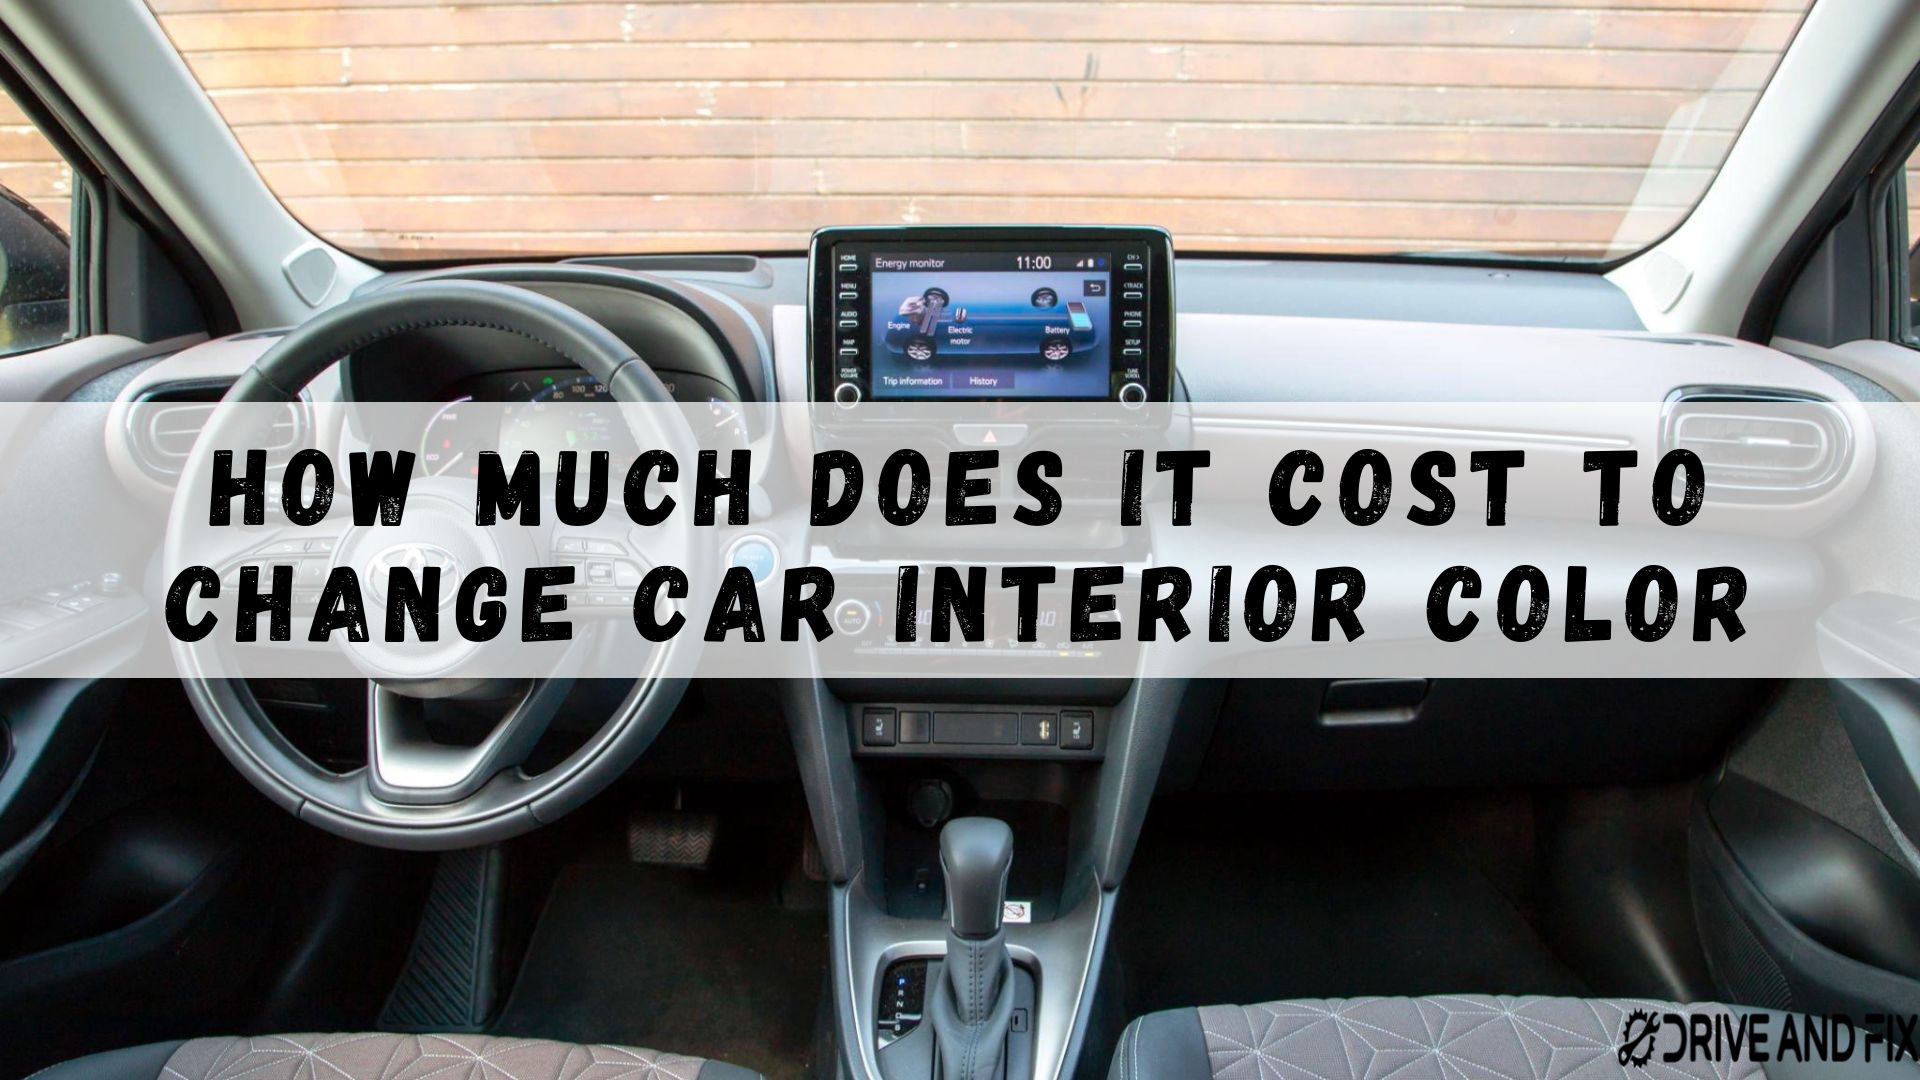 How Much Does It Cost to Change Car Interior Color